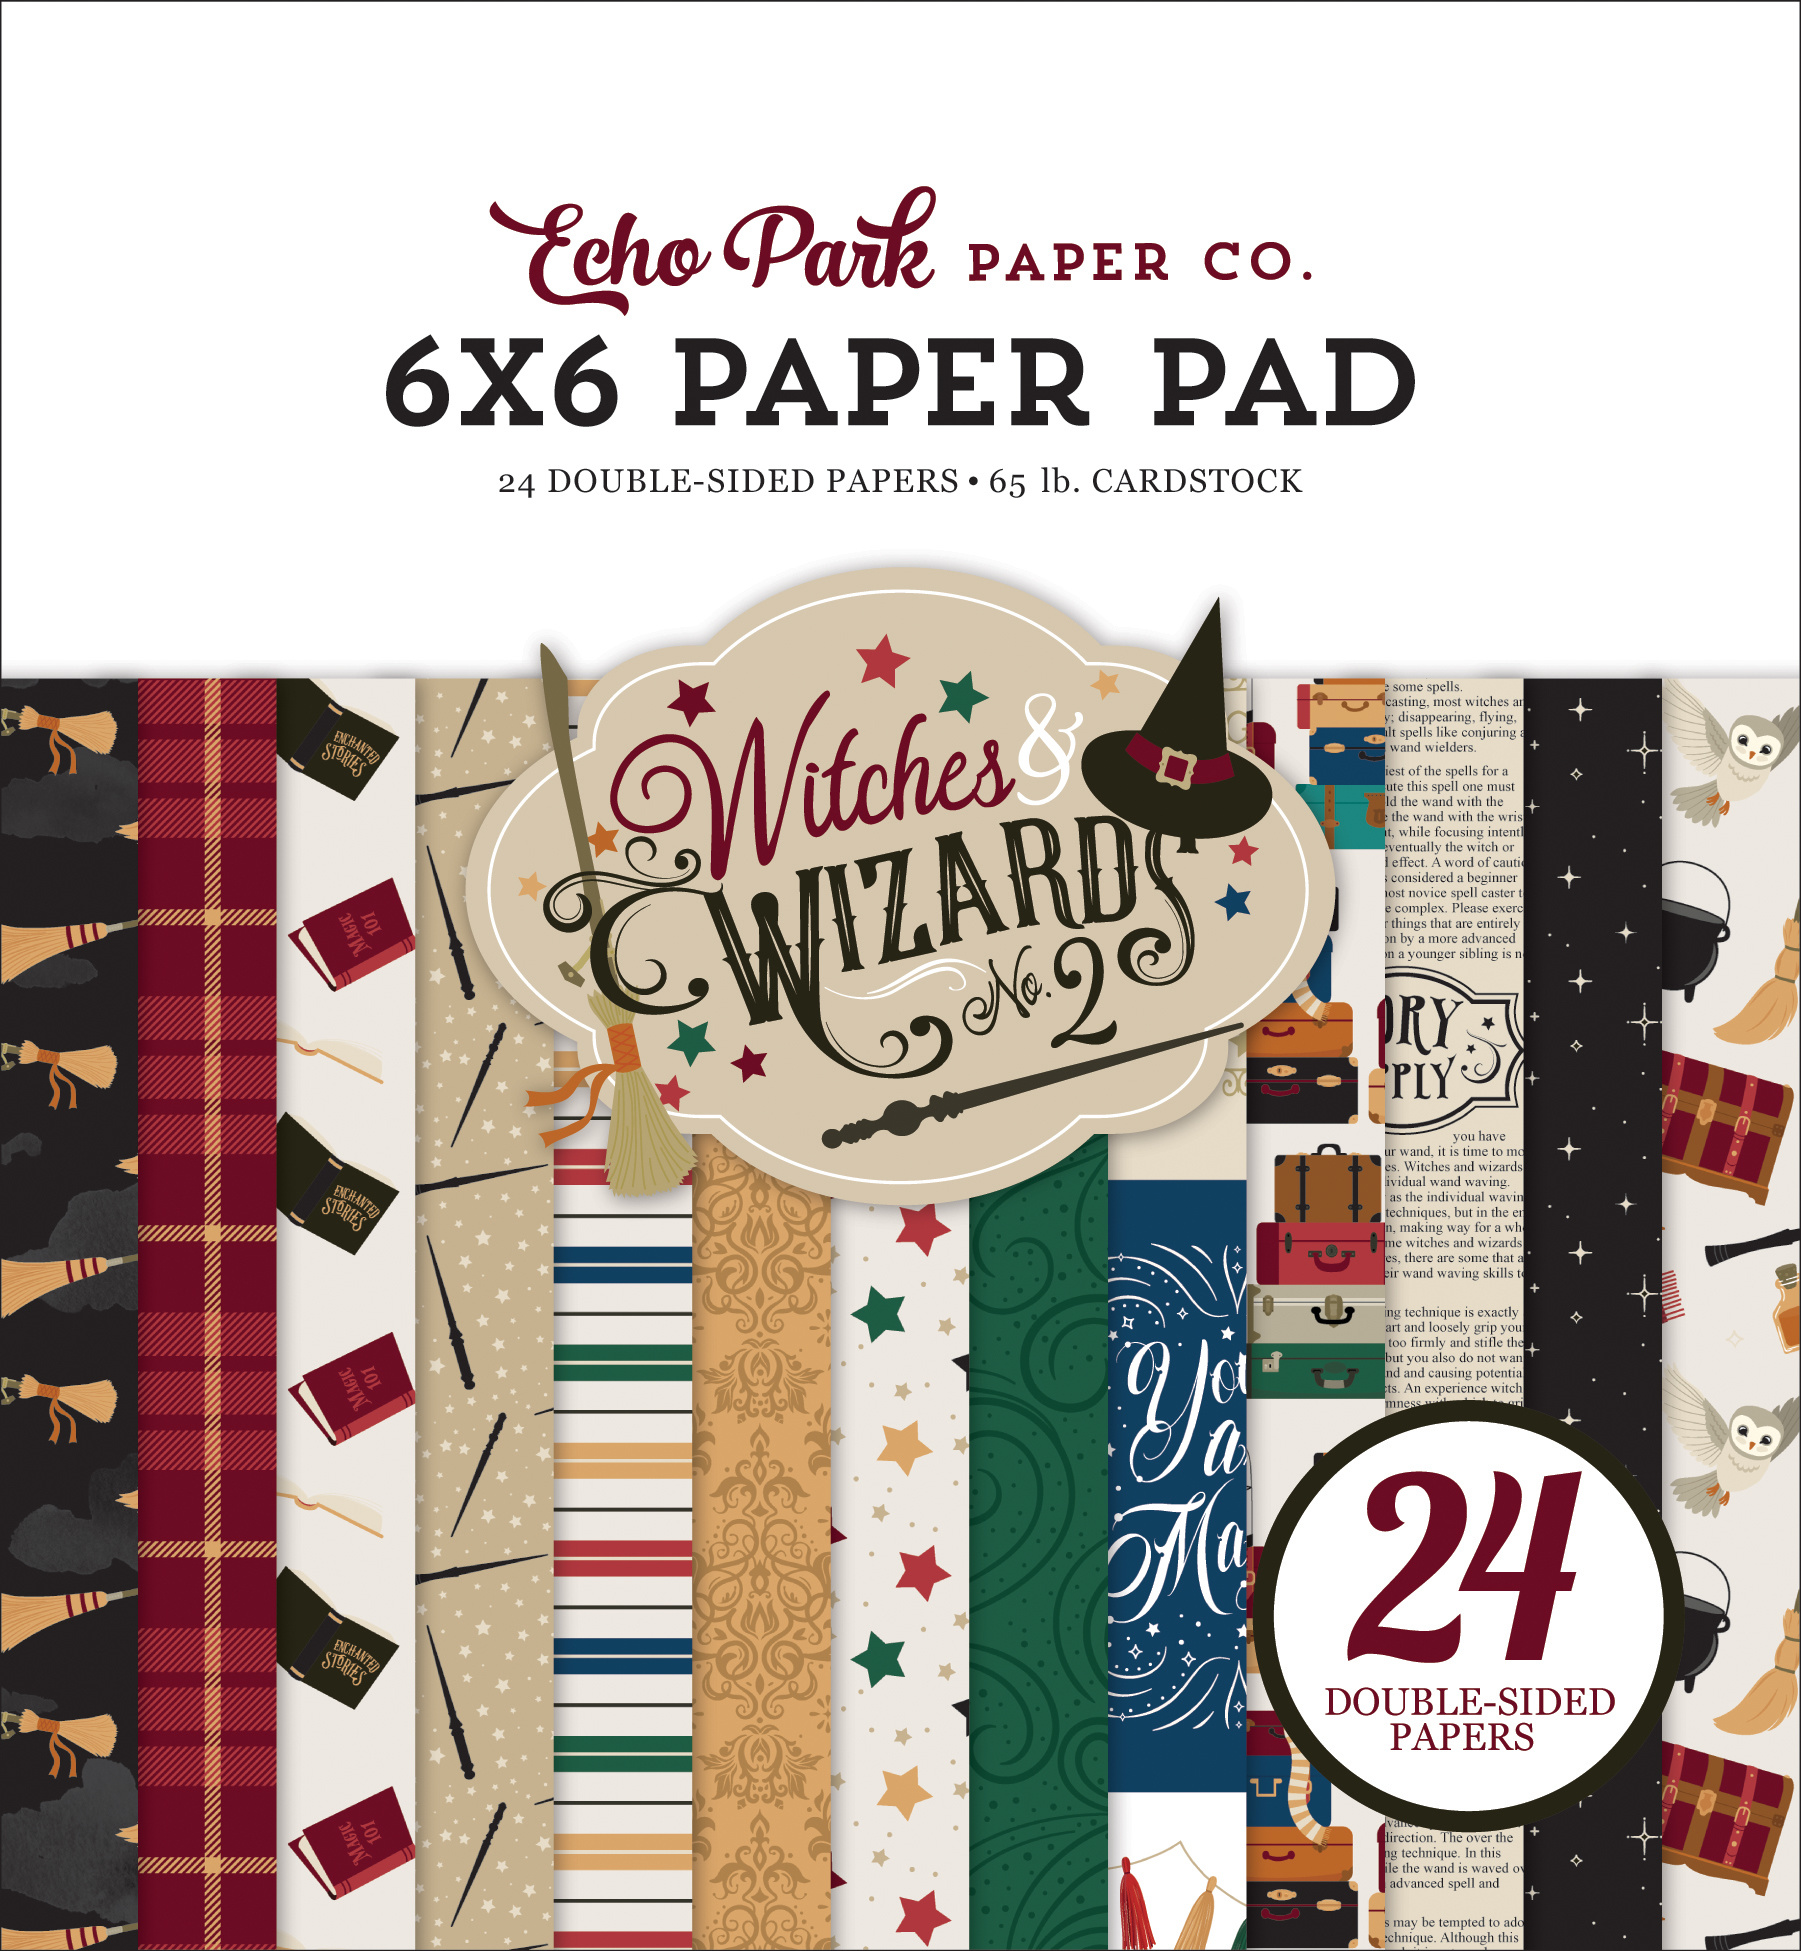 Echo Park Witches & Wizards No.2 6x6 Paper Pad